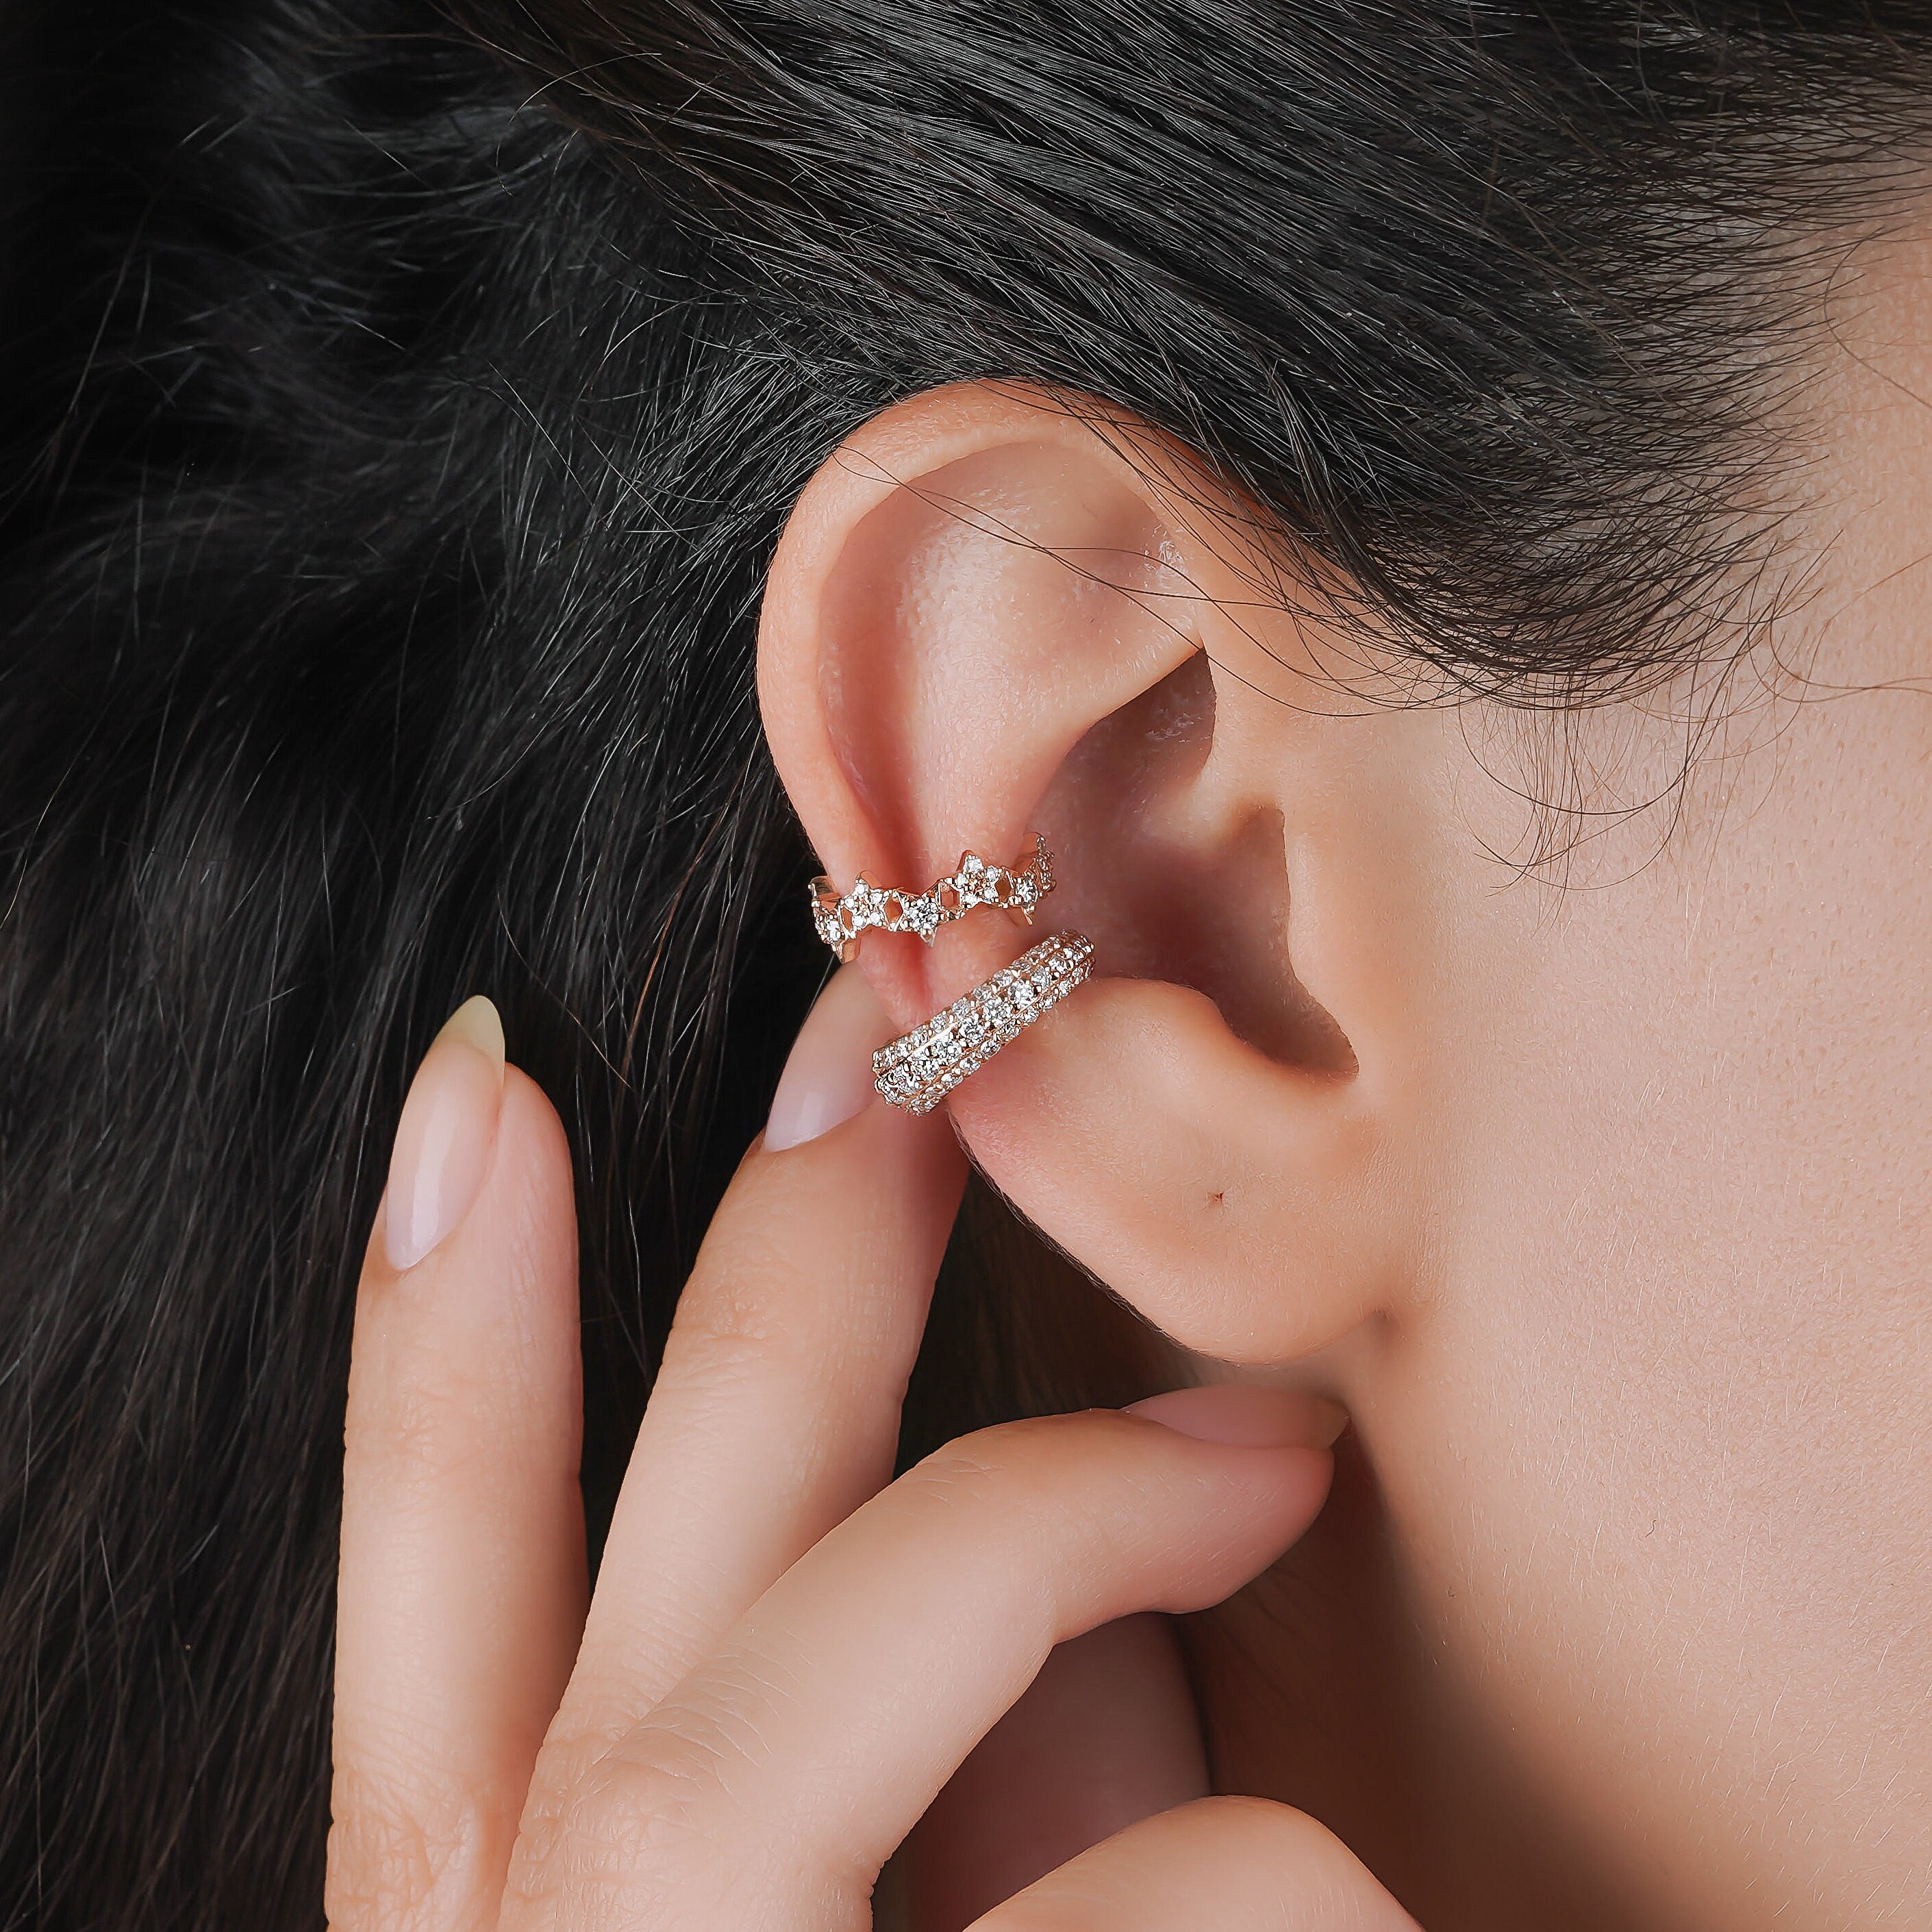 Diamond Star Ear Cuff Earrings Available in 14K and 18K Gold